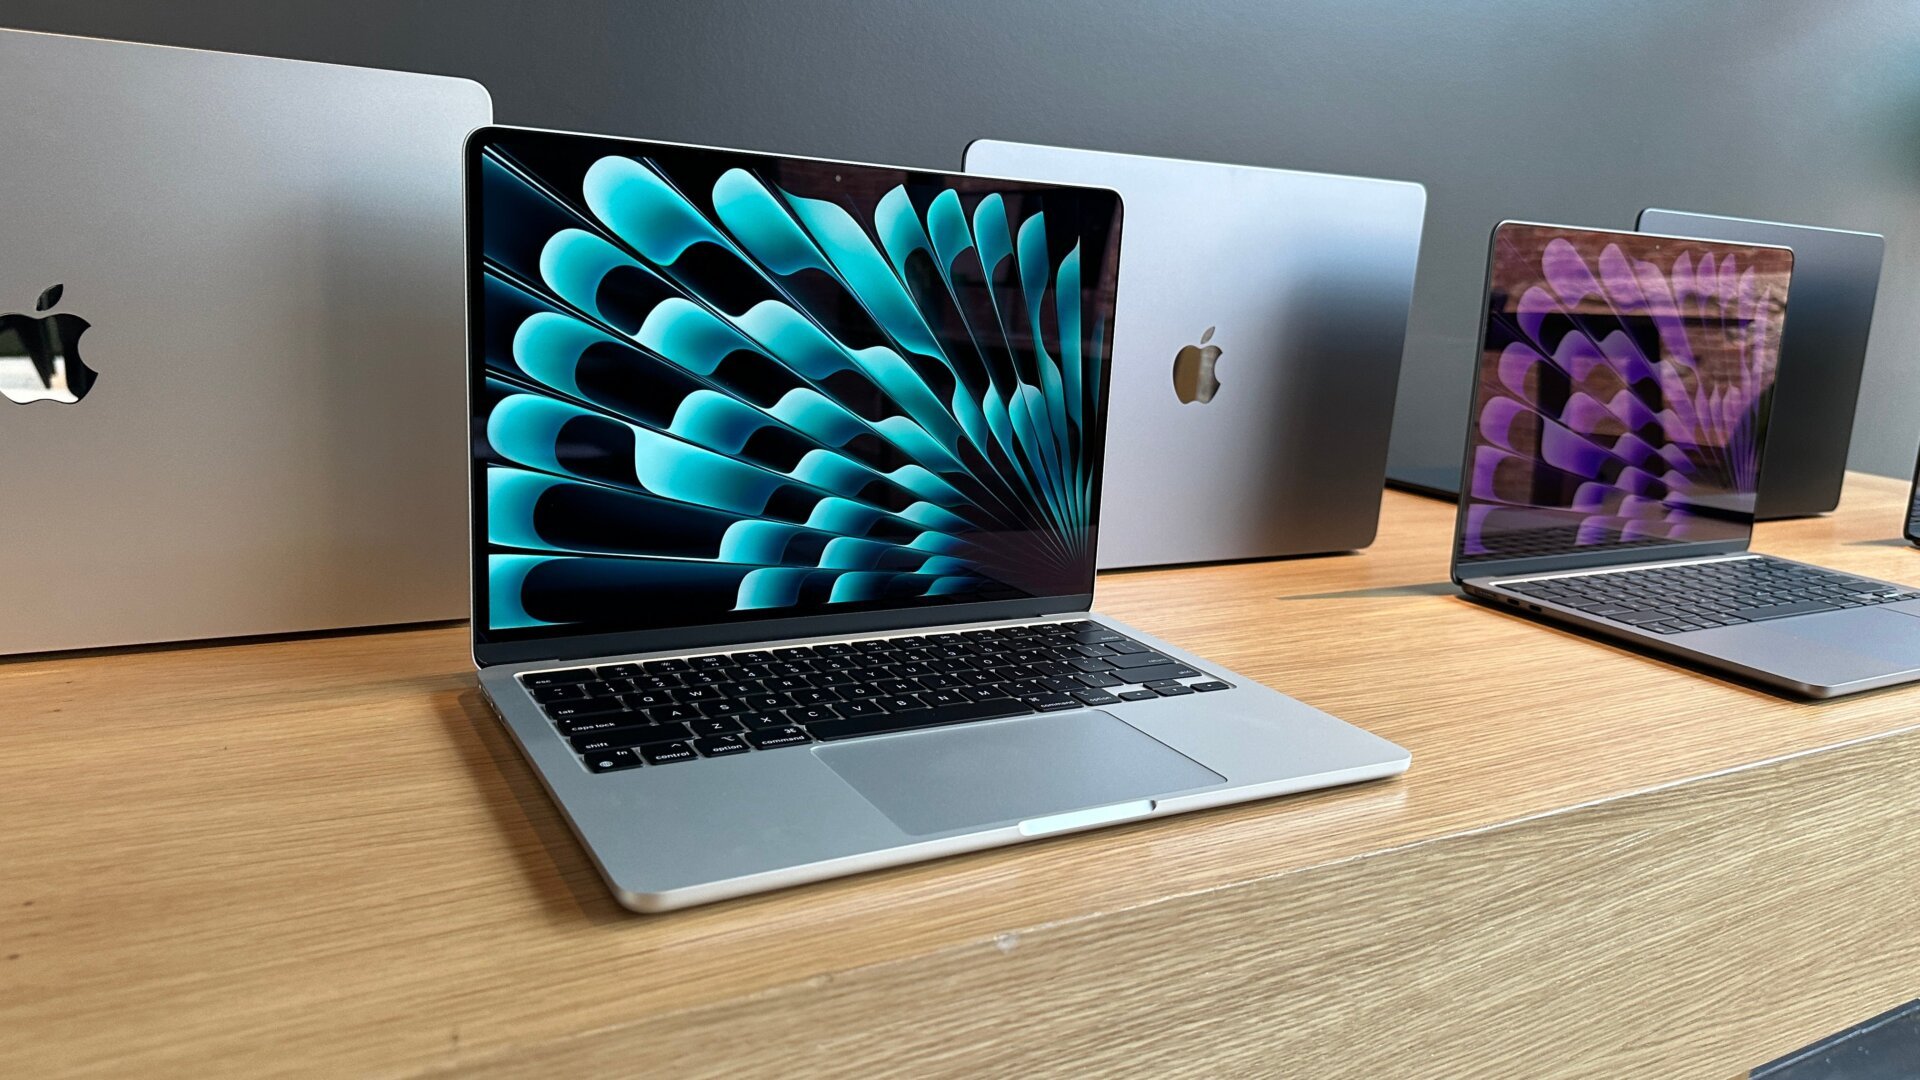 New Apple Patent Suggests Rotating Displays for Future MacBooks